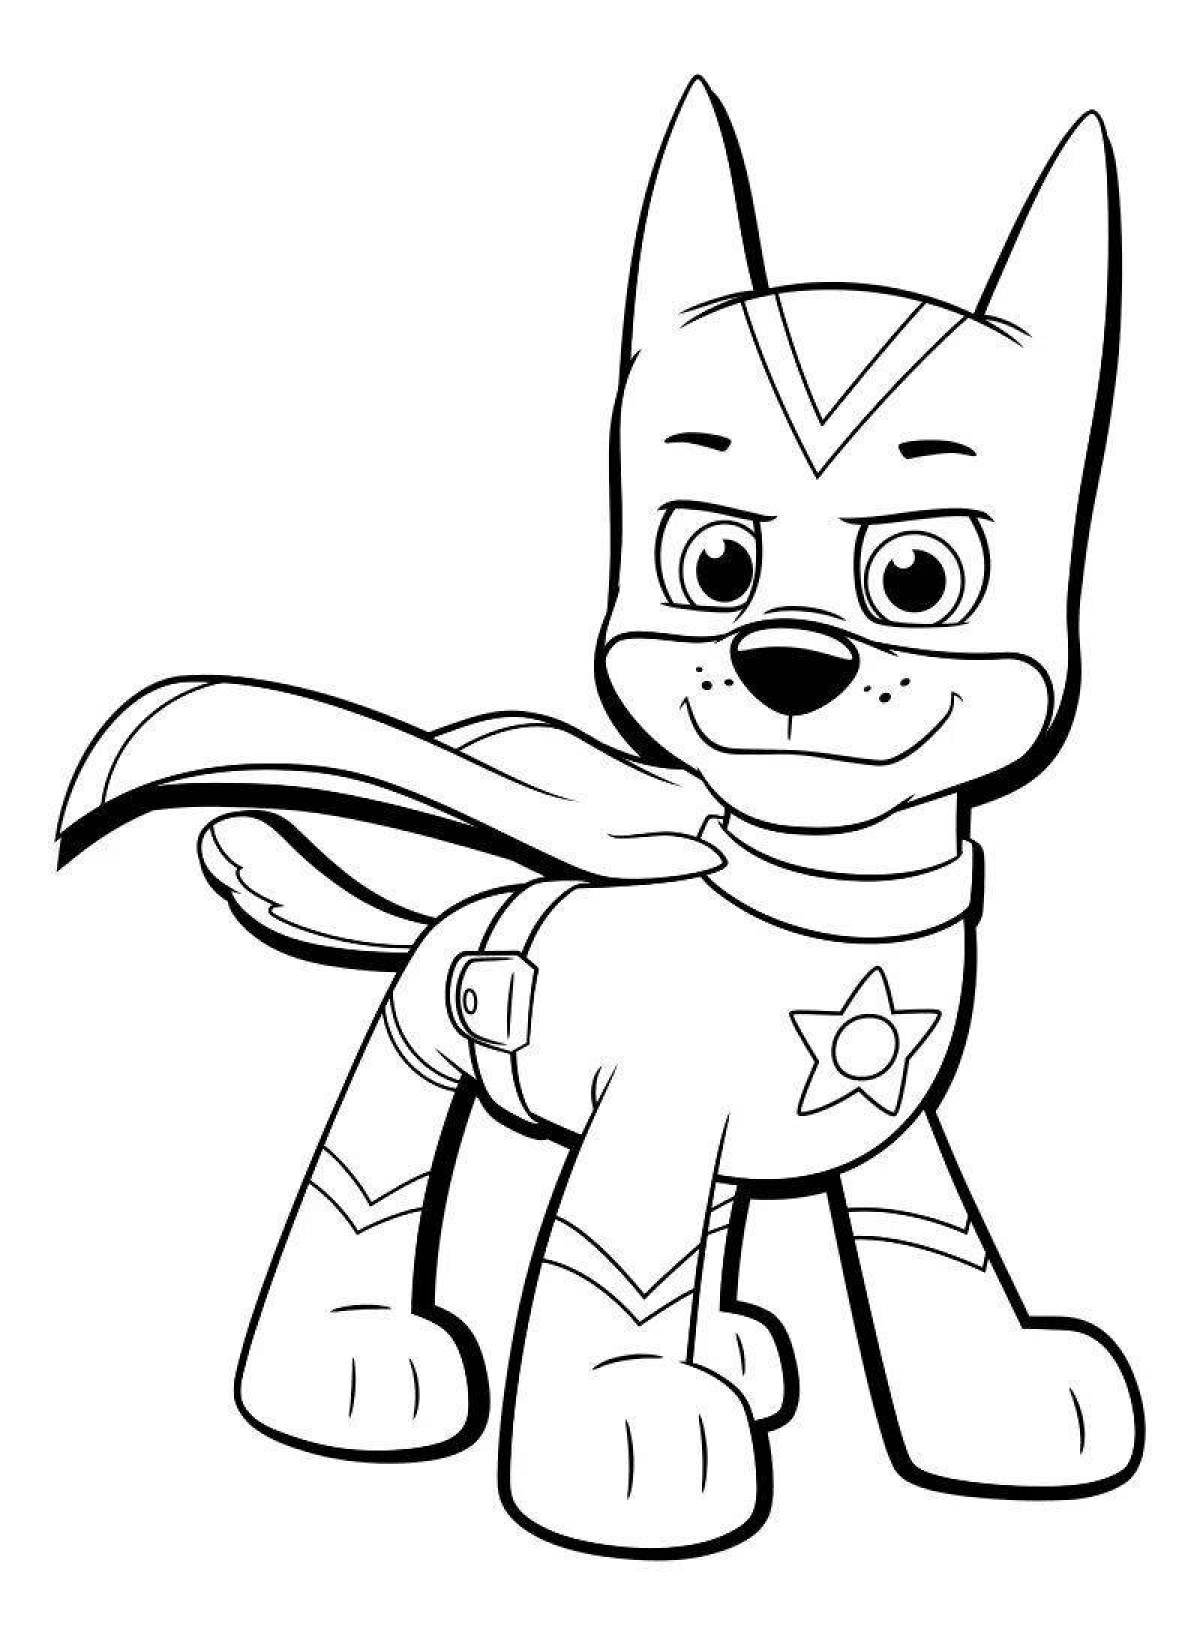 Coloring page adorable racer for kids